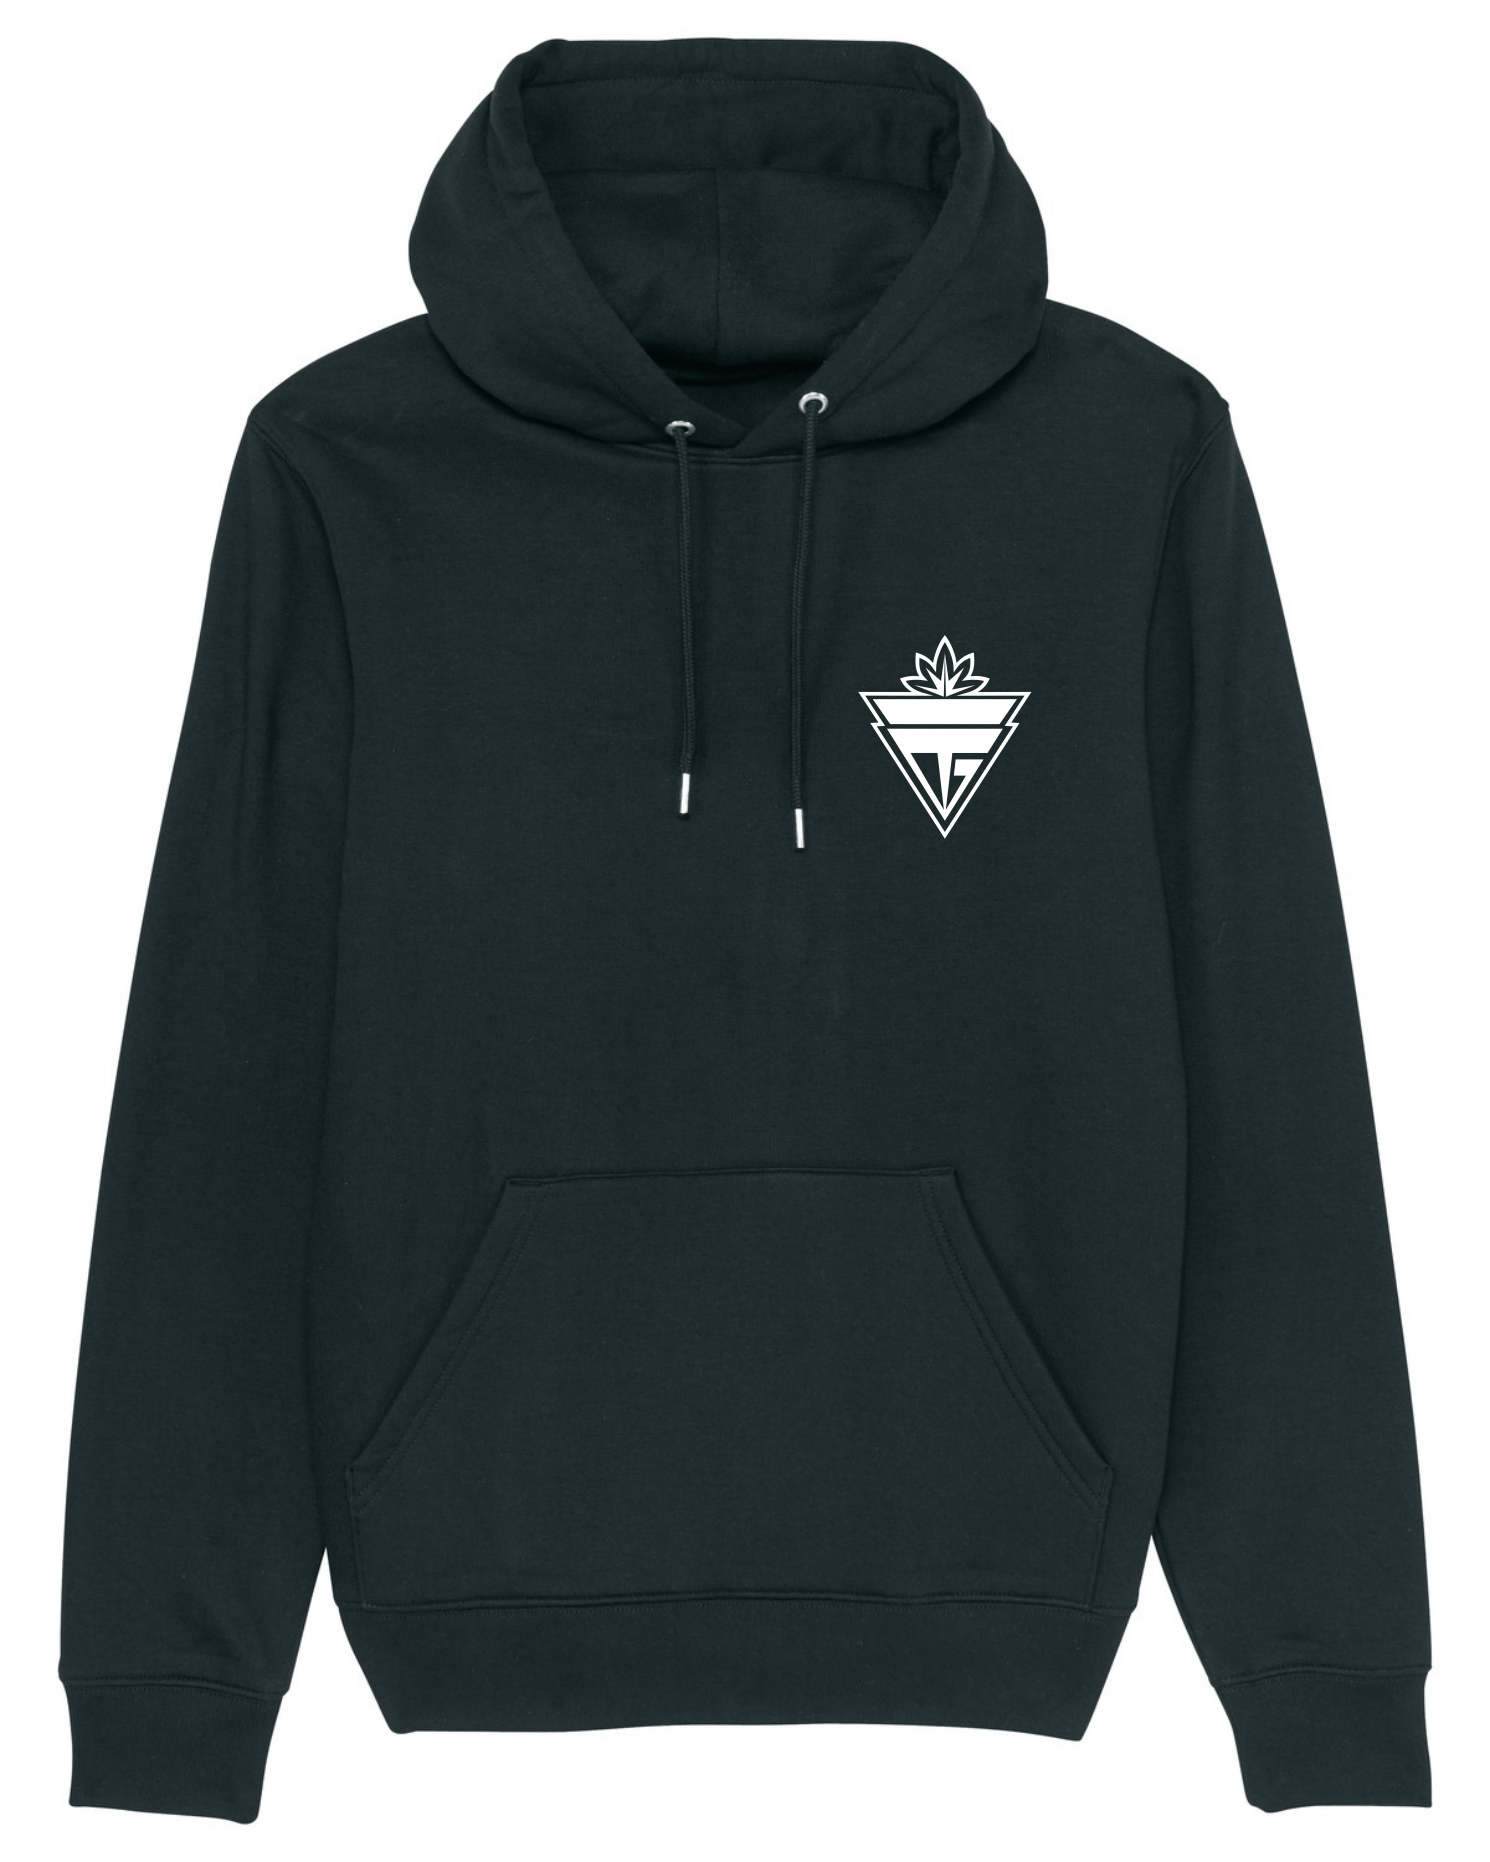 Island Goats hoodie front, black